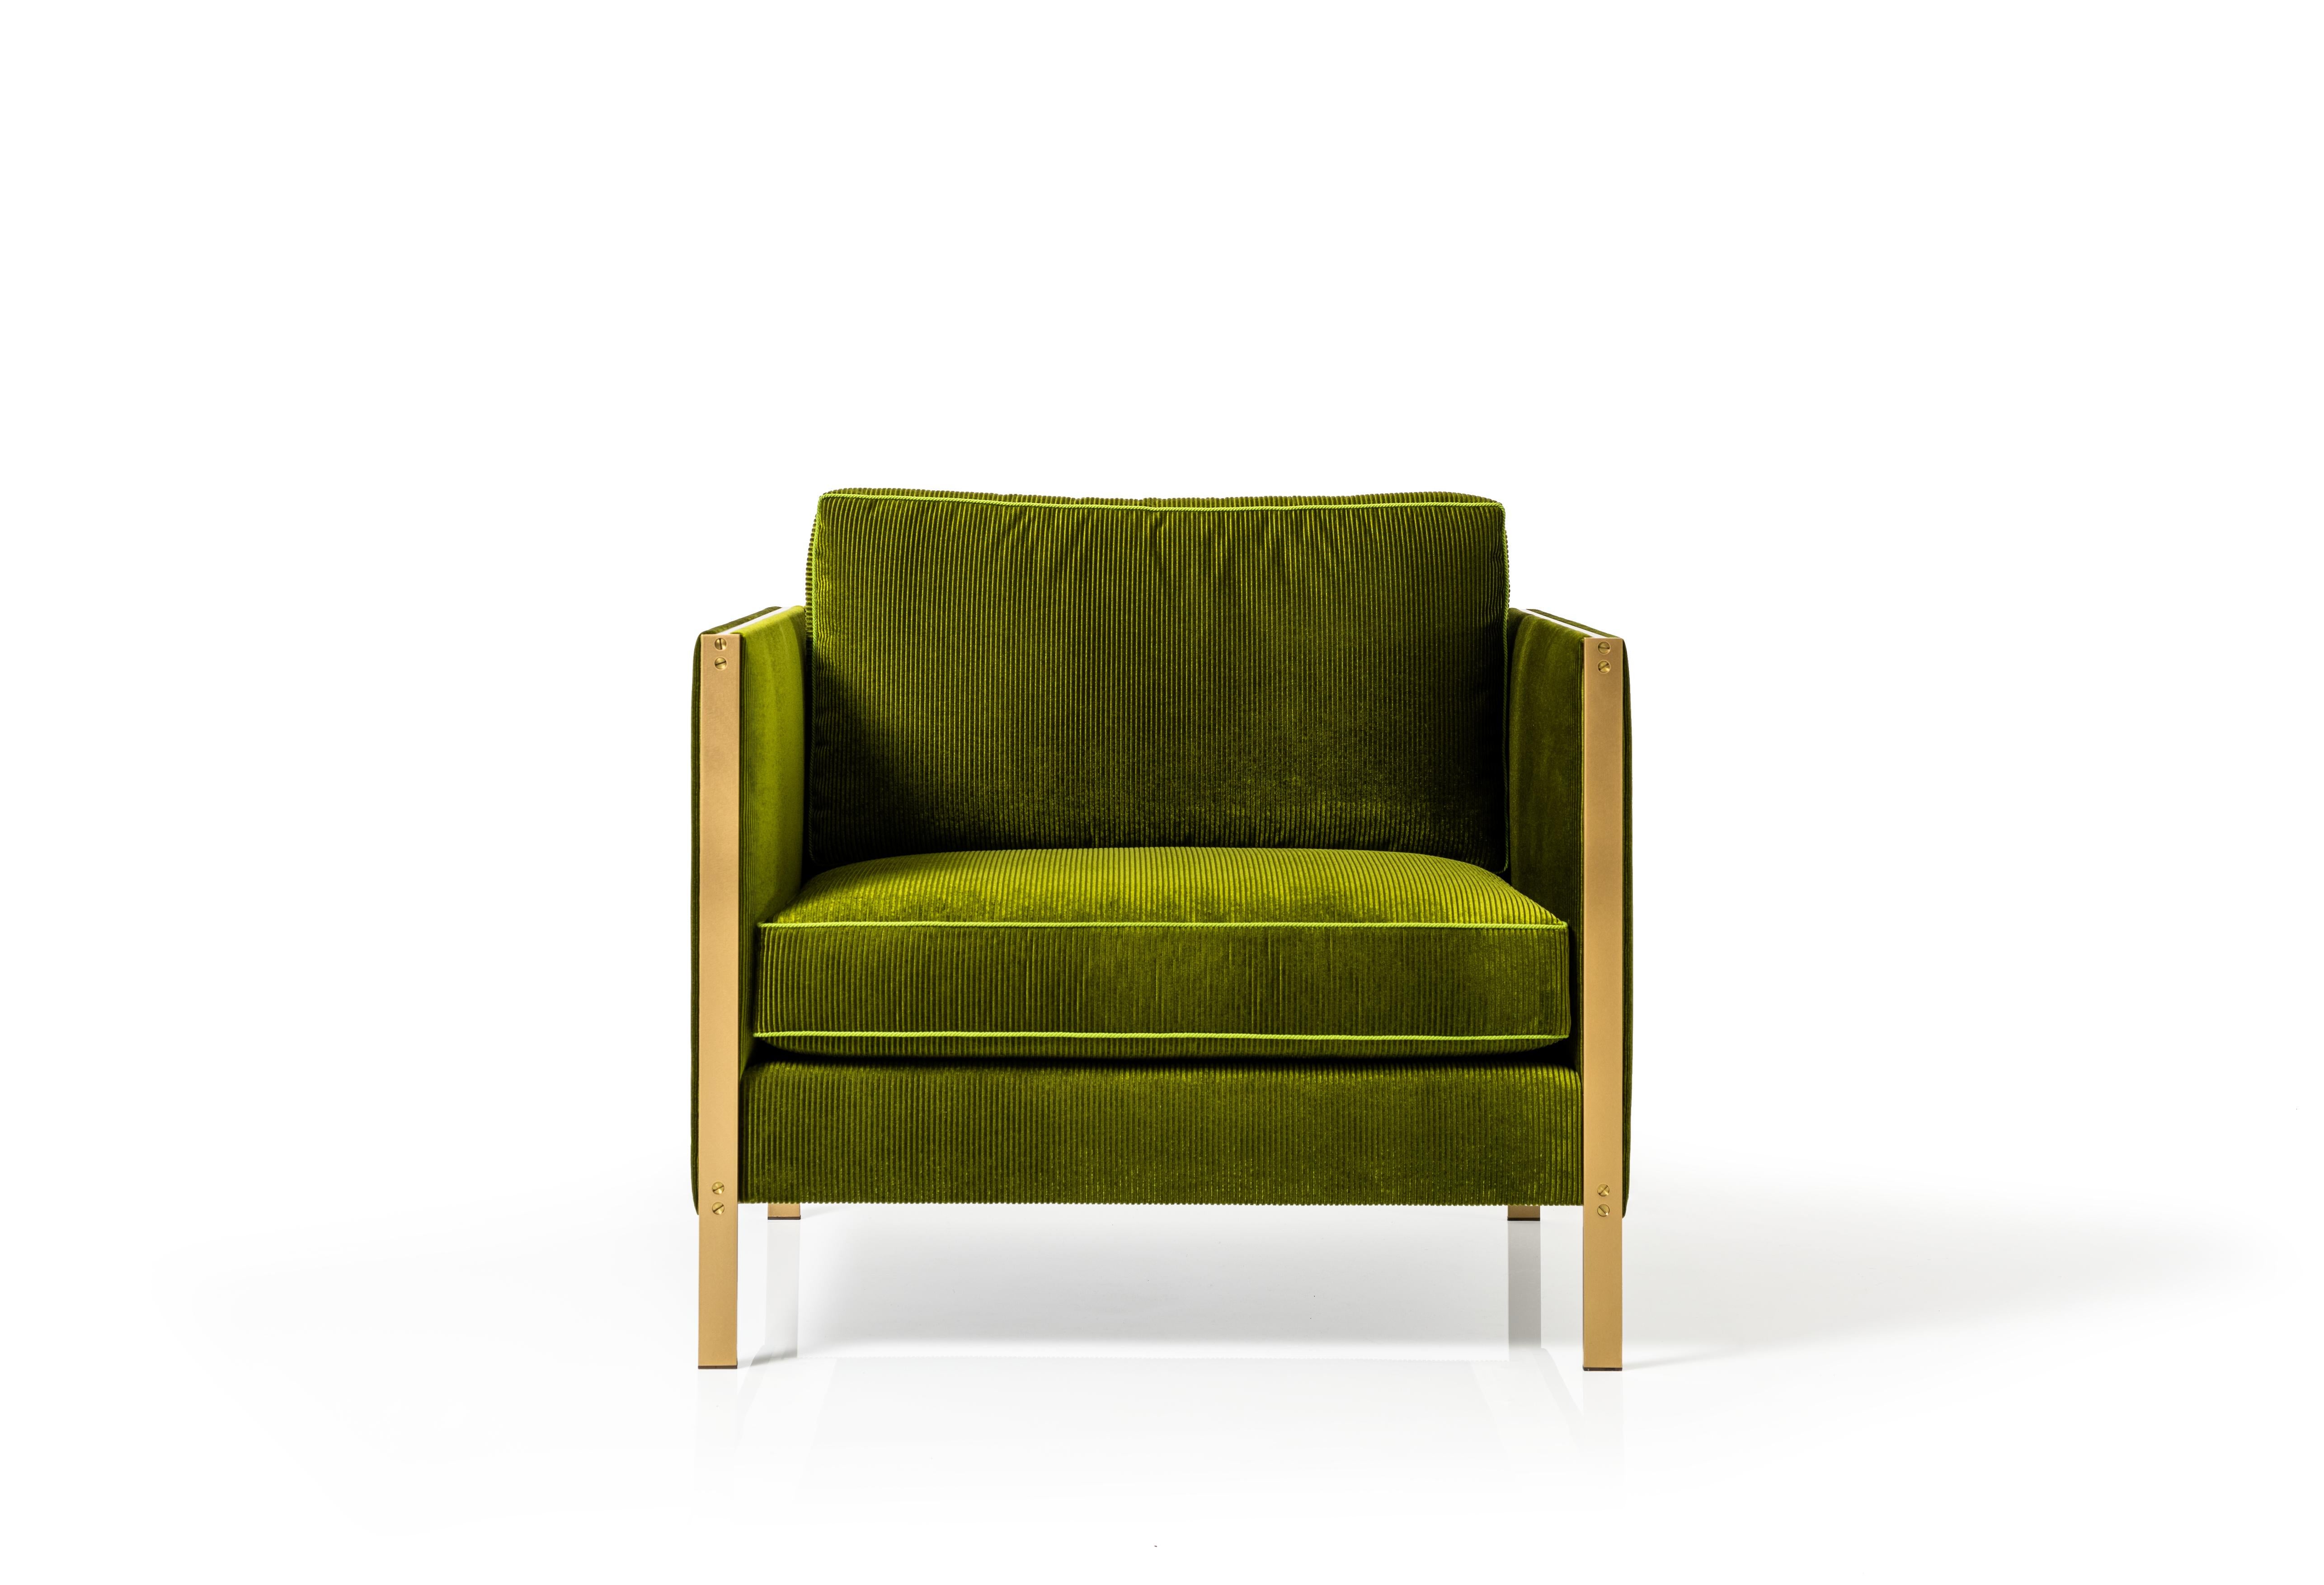 The architectural rigor of the Armstrong Armchair's mechanically fastened, metal frame forms a striking juxtaposition to the generously proportioned, down-filled seat and back cushions.

Shown with a Solid Brass frame and Emerald Green Corduroy. 

W